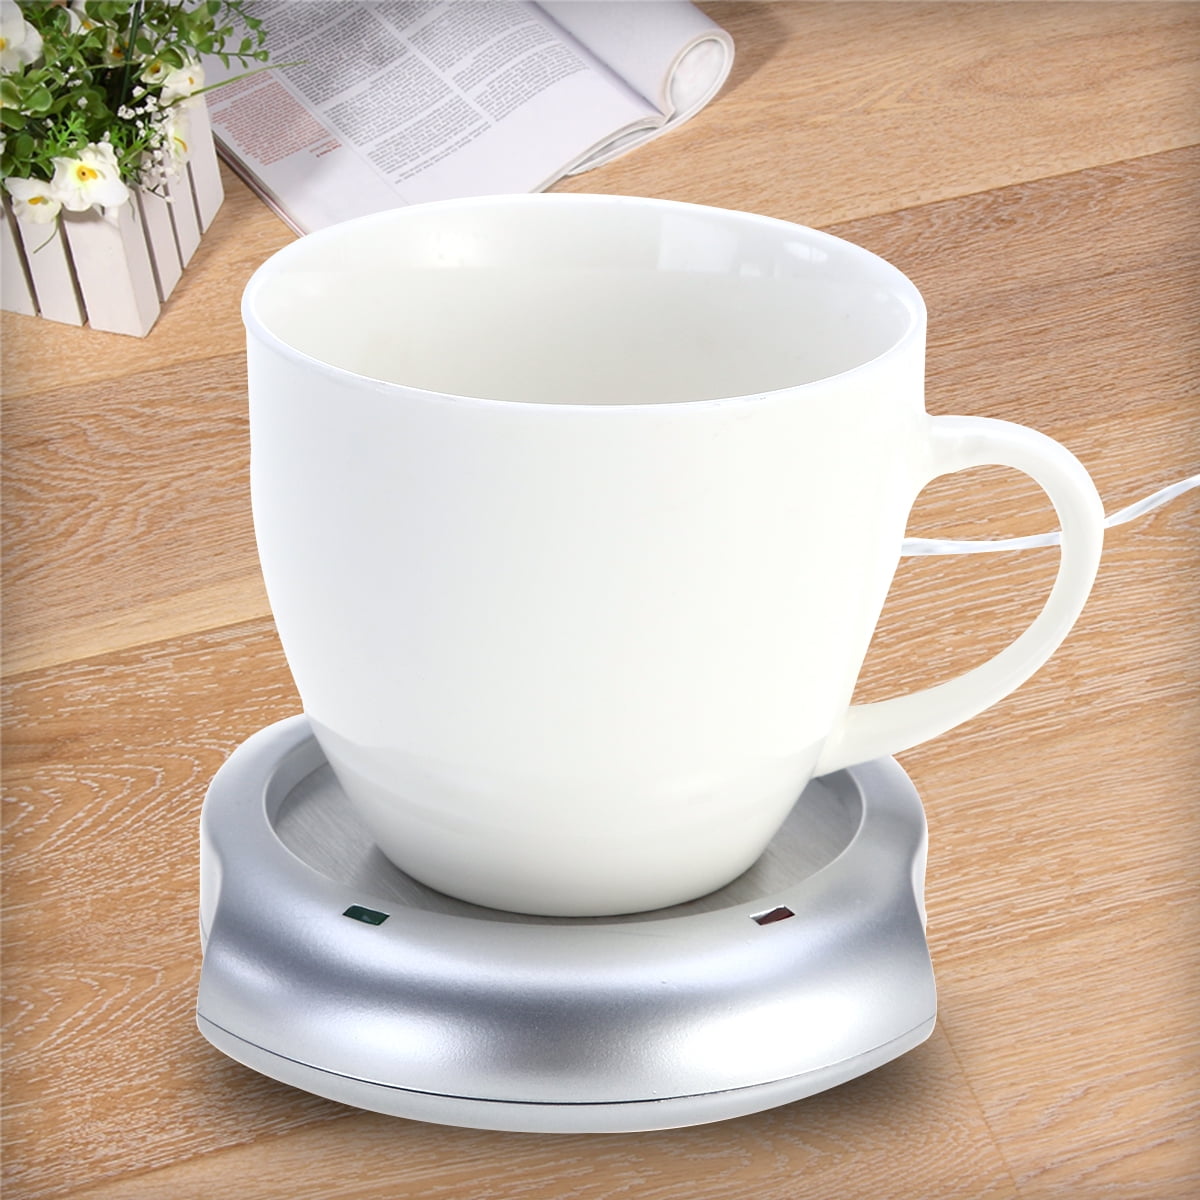 Hayy Coffee Mug Warmer with (Ceramic) Cup (USB Cable) & Cup Warmer Set for Desk with Gravity Sensing Auto Shut Off Heating Plate for Home Office Milk Tea